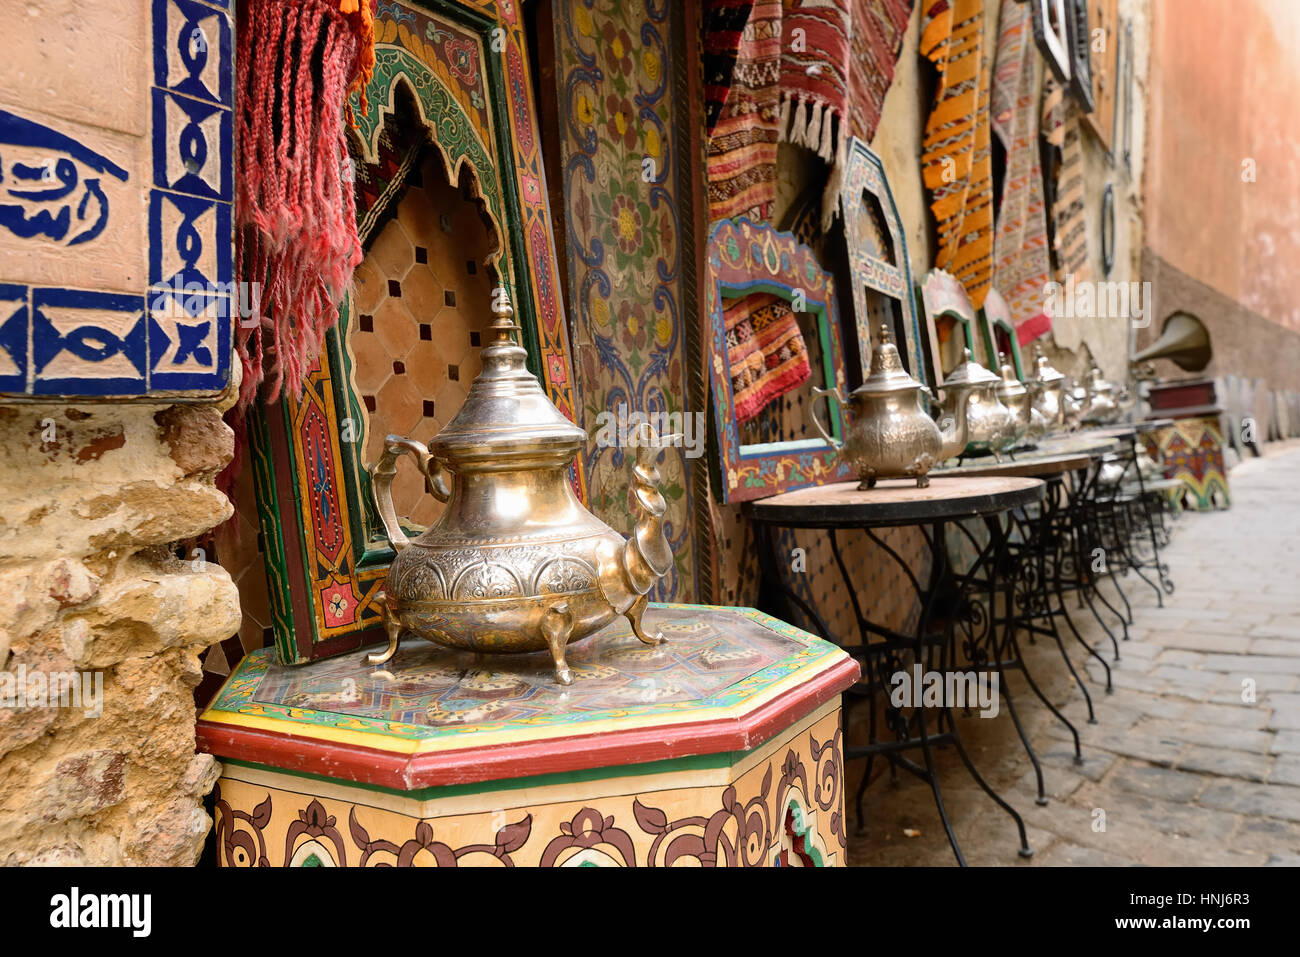 Decorative elements on the souk (market) in the old town, Medina in Morocco. Jug for brewing the tea. Stock Photo